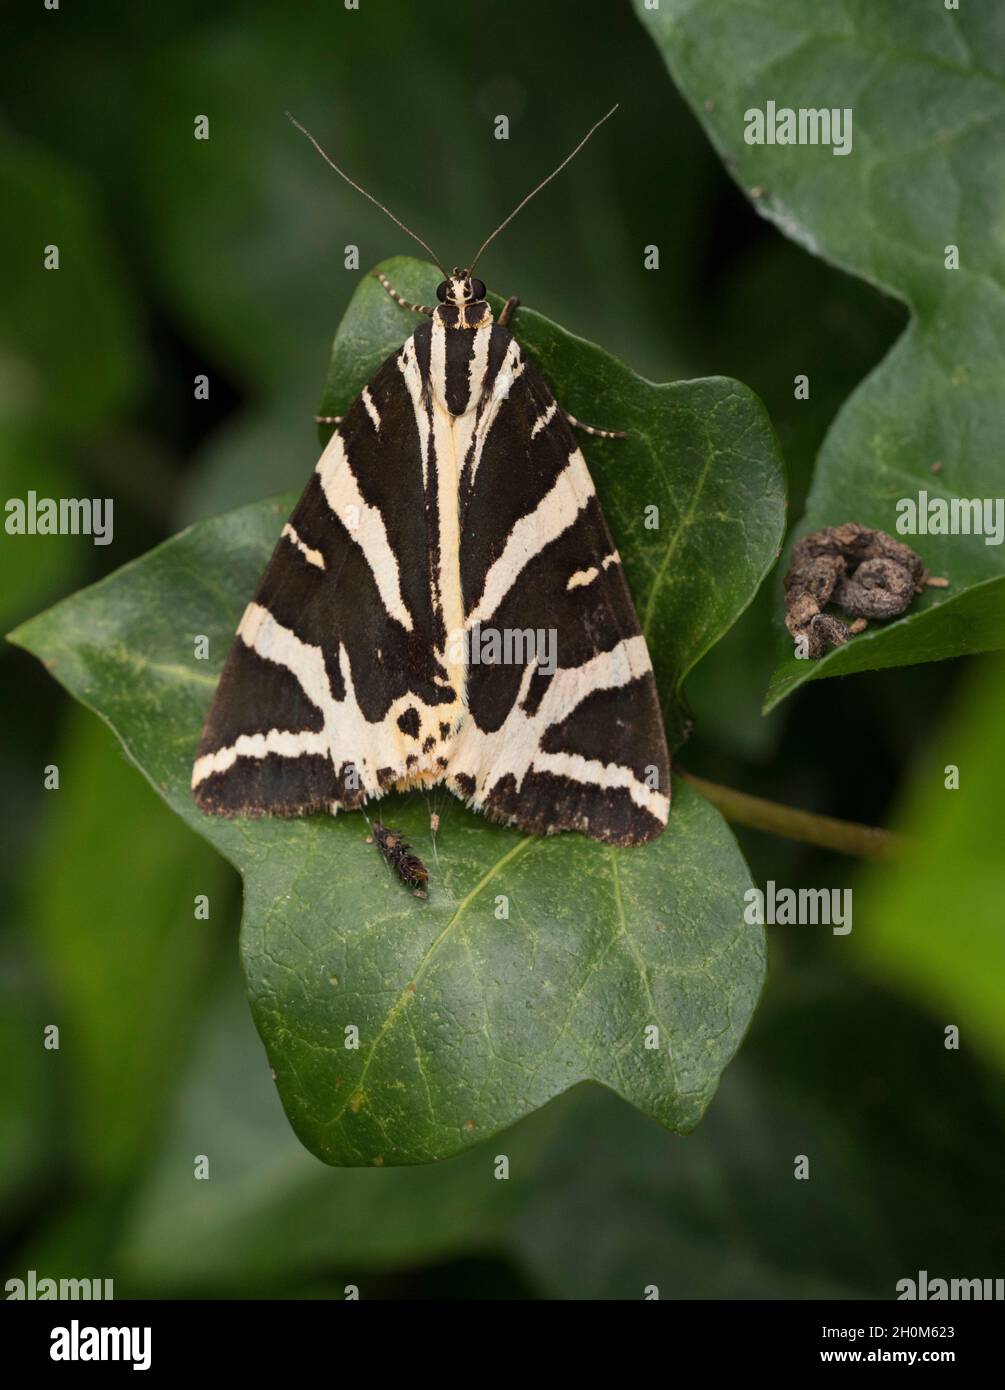 Jersey Tiger, Euplagia quadripunctaria, single adult resting on Ivy leaf, Hedera helix. August. Lea Valley, Essex, UK Stock Photo